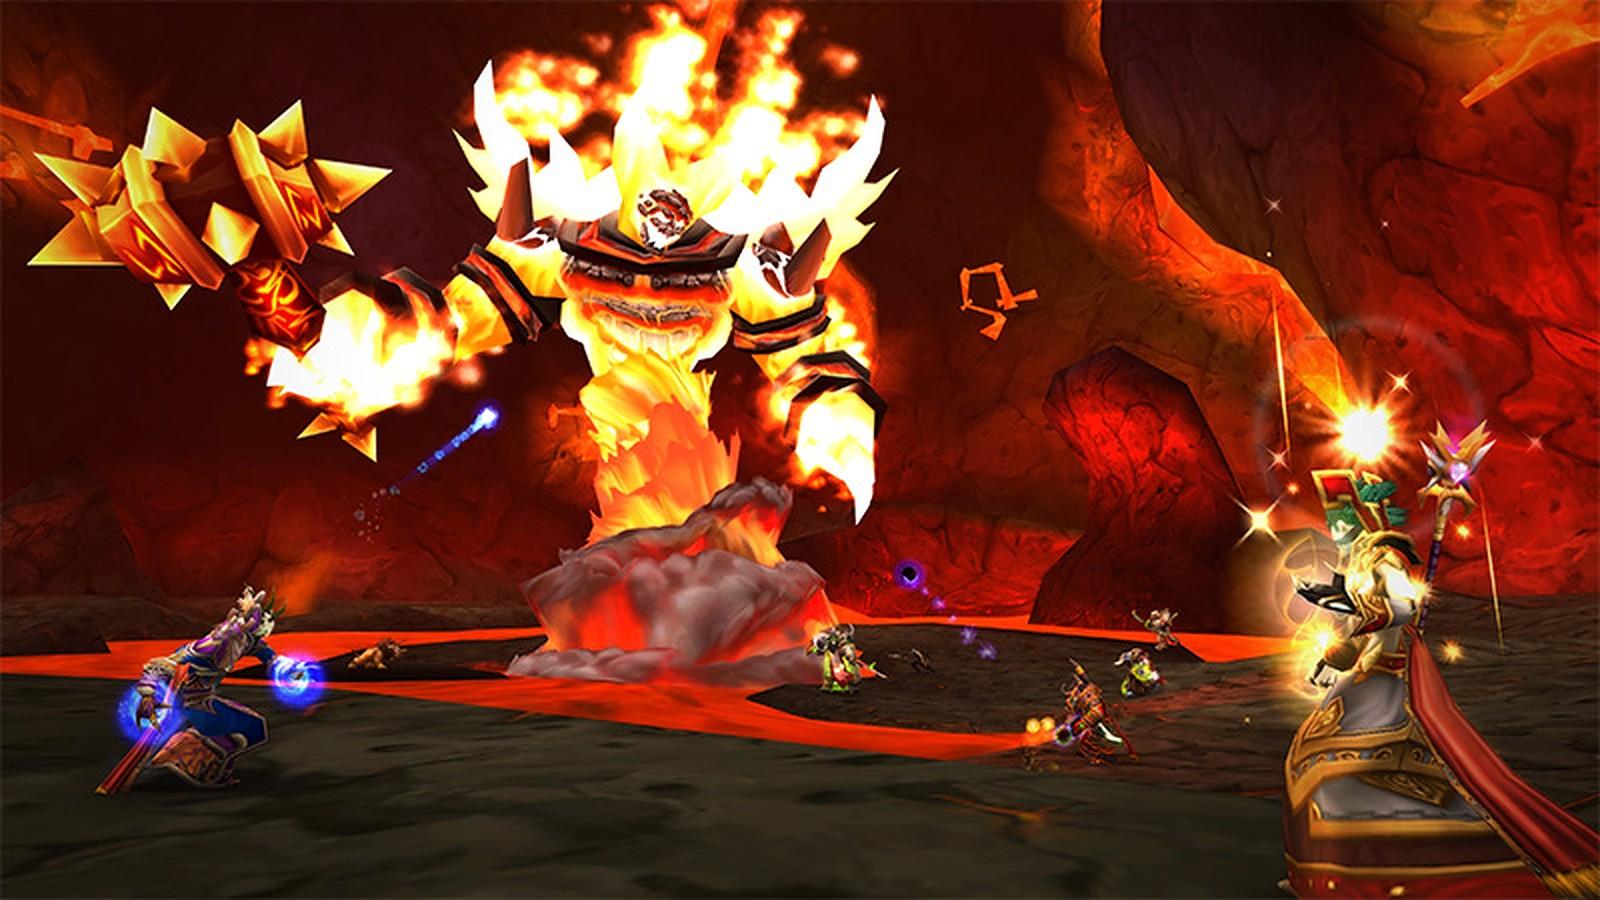 WoW players fight Ragnaros in Season of Discovery